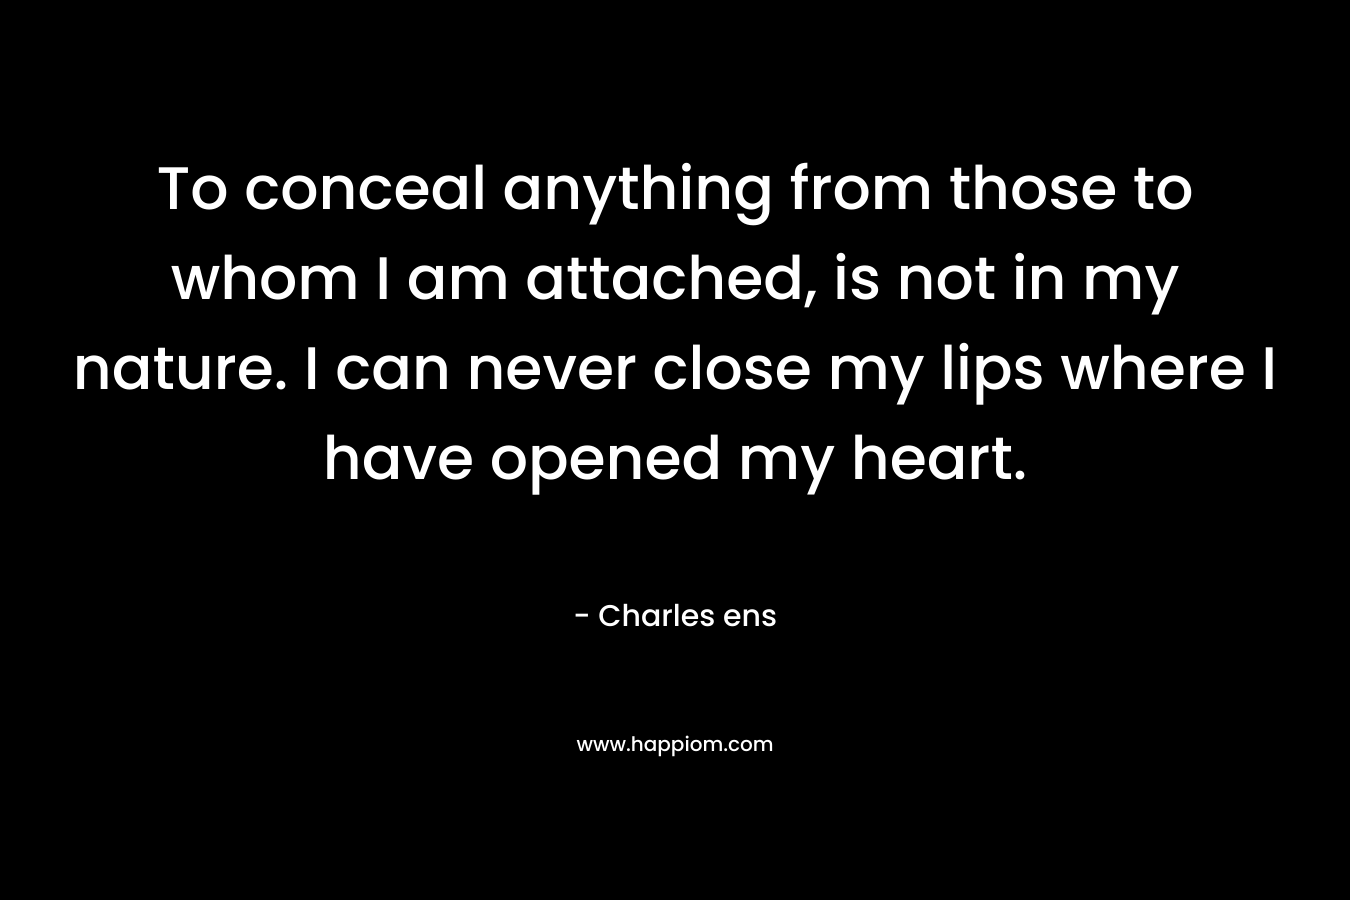 To conceal anything from those to whom I am attached, is not in my nature. I can never close my lips where I have opened my heart. – Charles ens